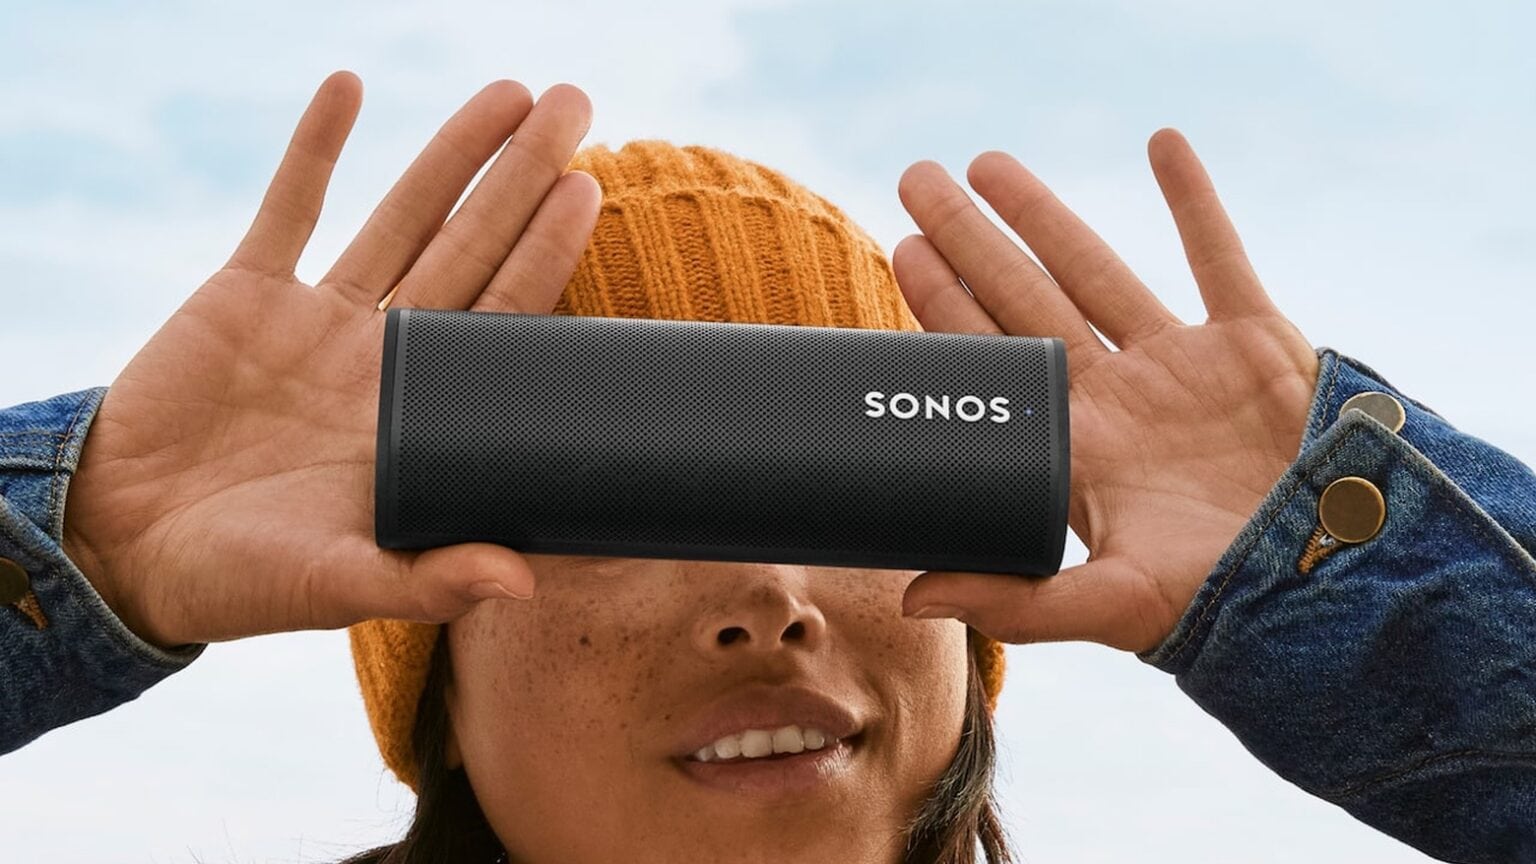 Pint-size Sonos Roam speaker goes anywhere your iPhone does